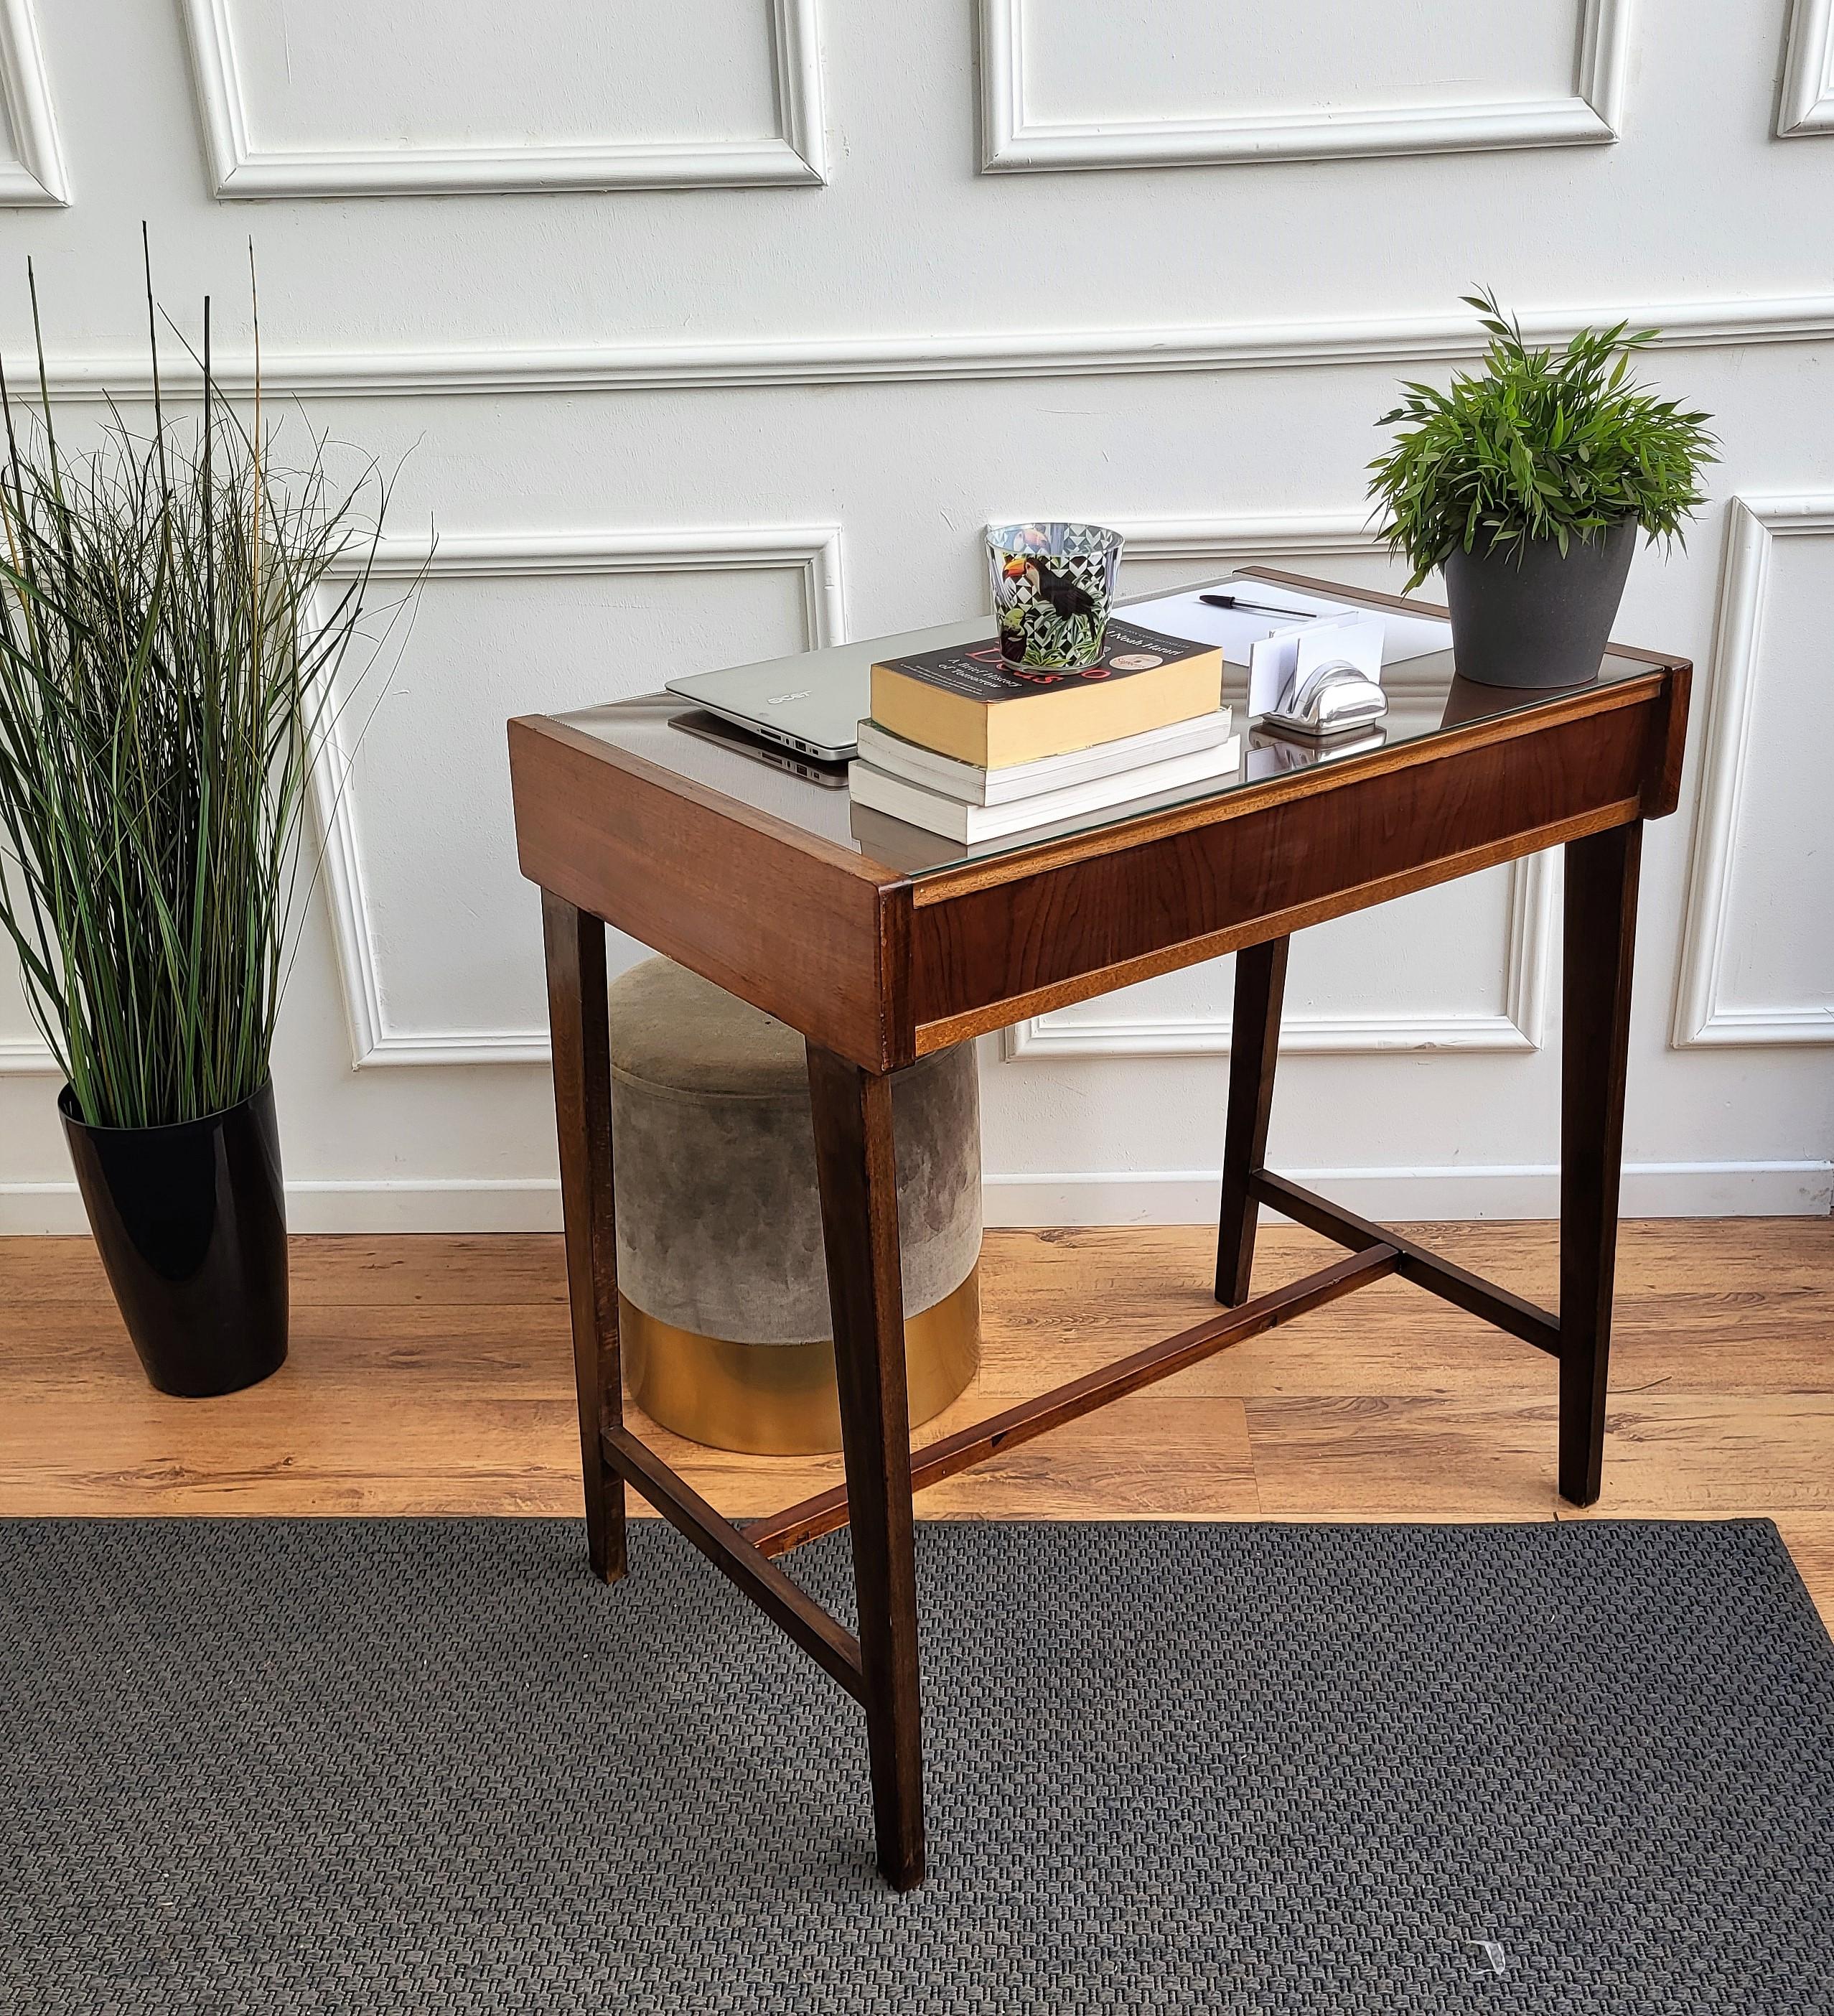 Very elegant Italian Mid-Century Modern small desk or writing table with stylish legs and veneer wood with a central drawer. This beautiful piece is completed by the glass top and the brass drawer handles. Ideal in any room as a small stand alone